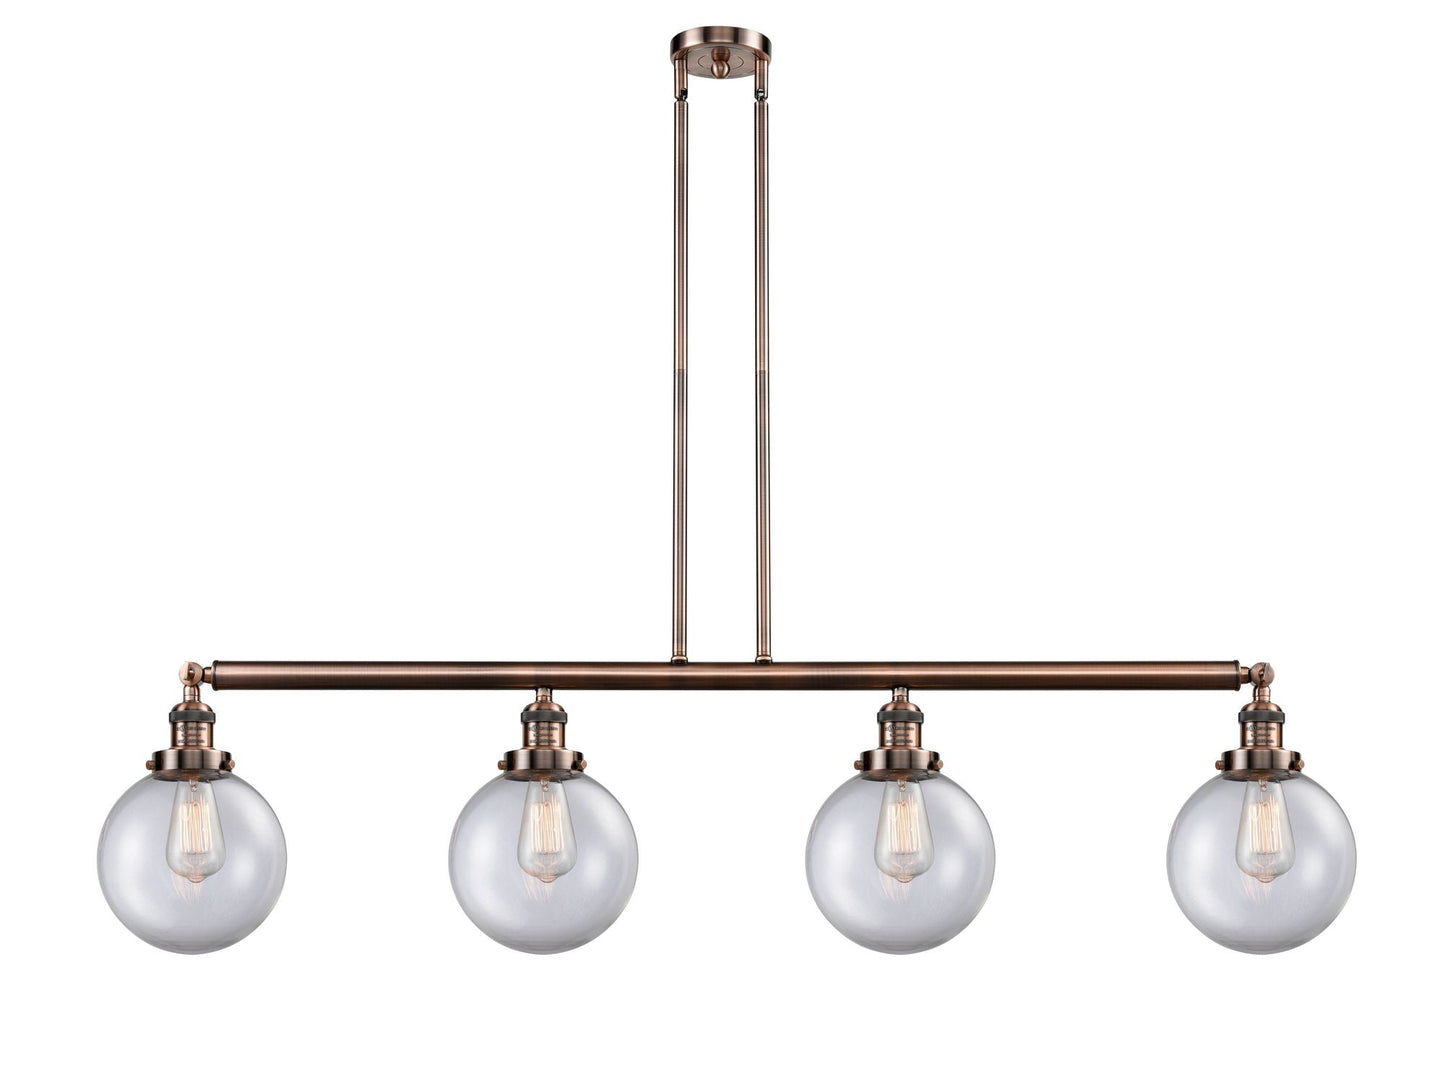 214-AC-G202-8 4-Light 52.625" Antique Copper Island Light - Clear Beacon Glass - LED Bulb - Dimmensions: 52.625 x 8 x 12.875<br>Minimum Height : 22<br>Maximum Height : 46 - Sloped Ceiling Compatible: Yes